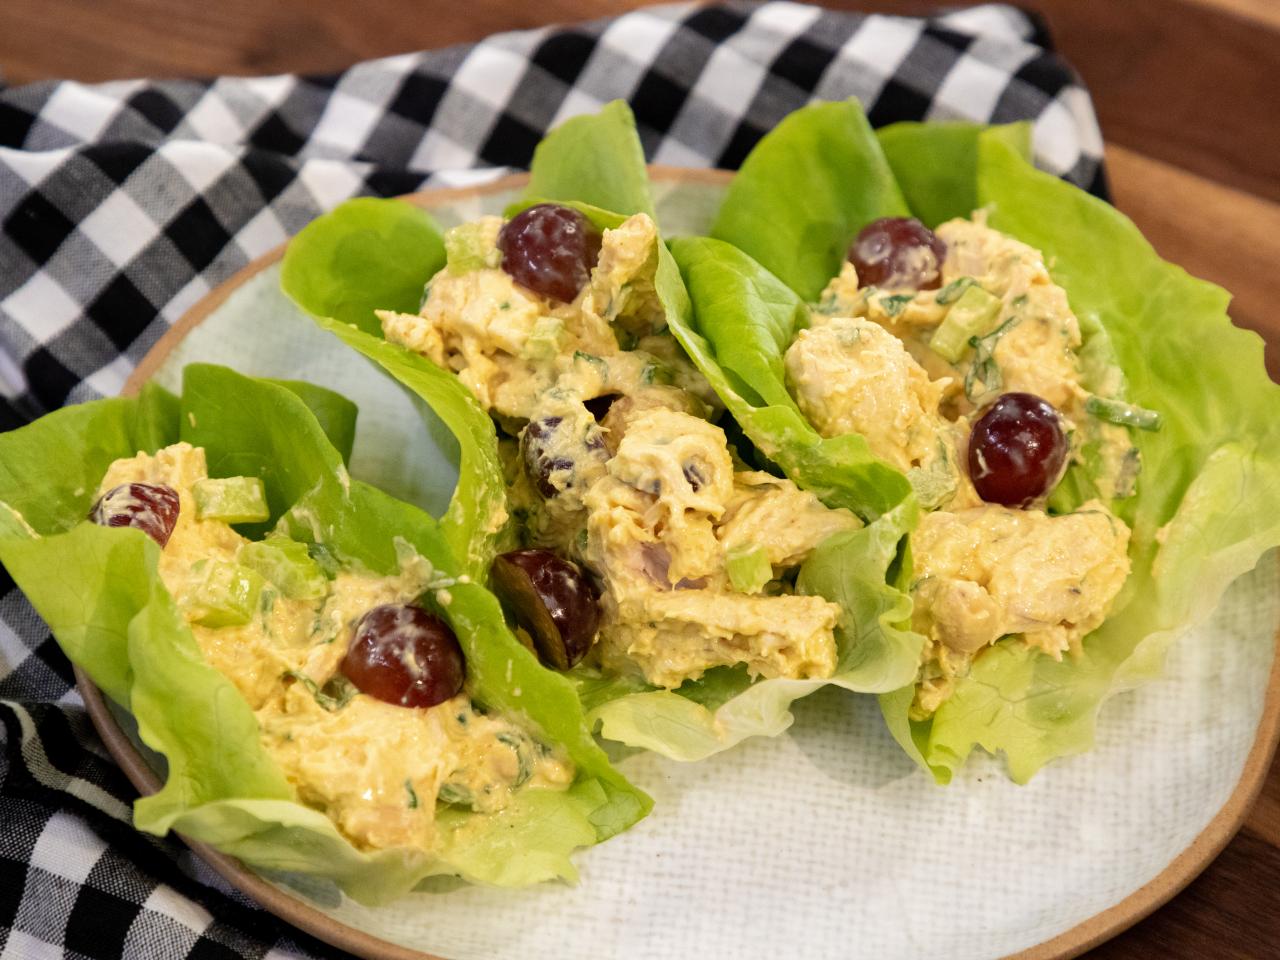 Curried Chicken Salad Wrap Recipe - The Kitchen Wife